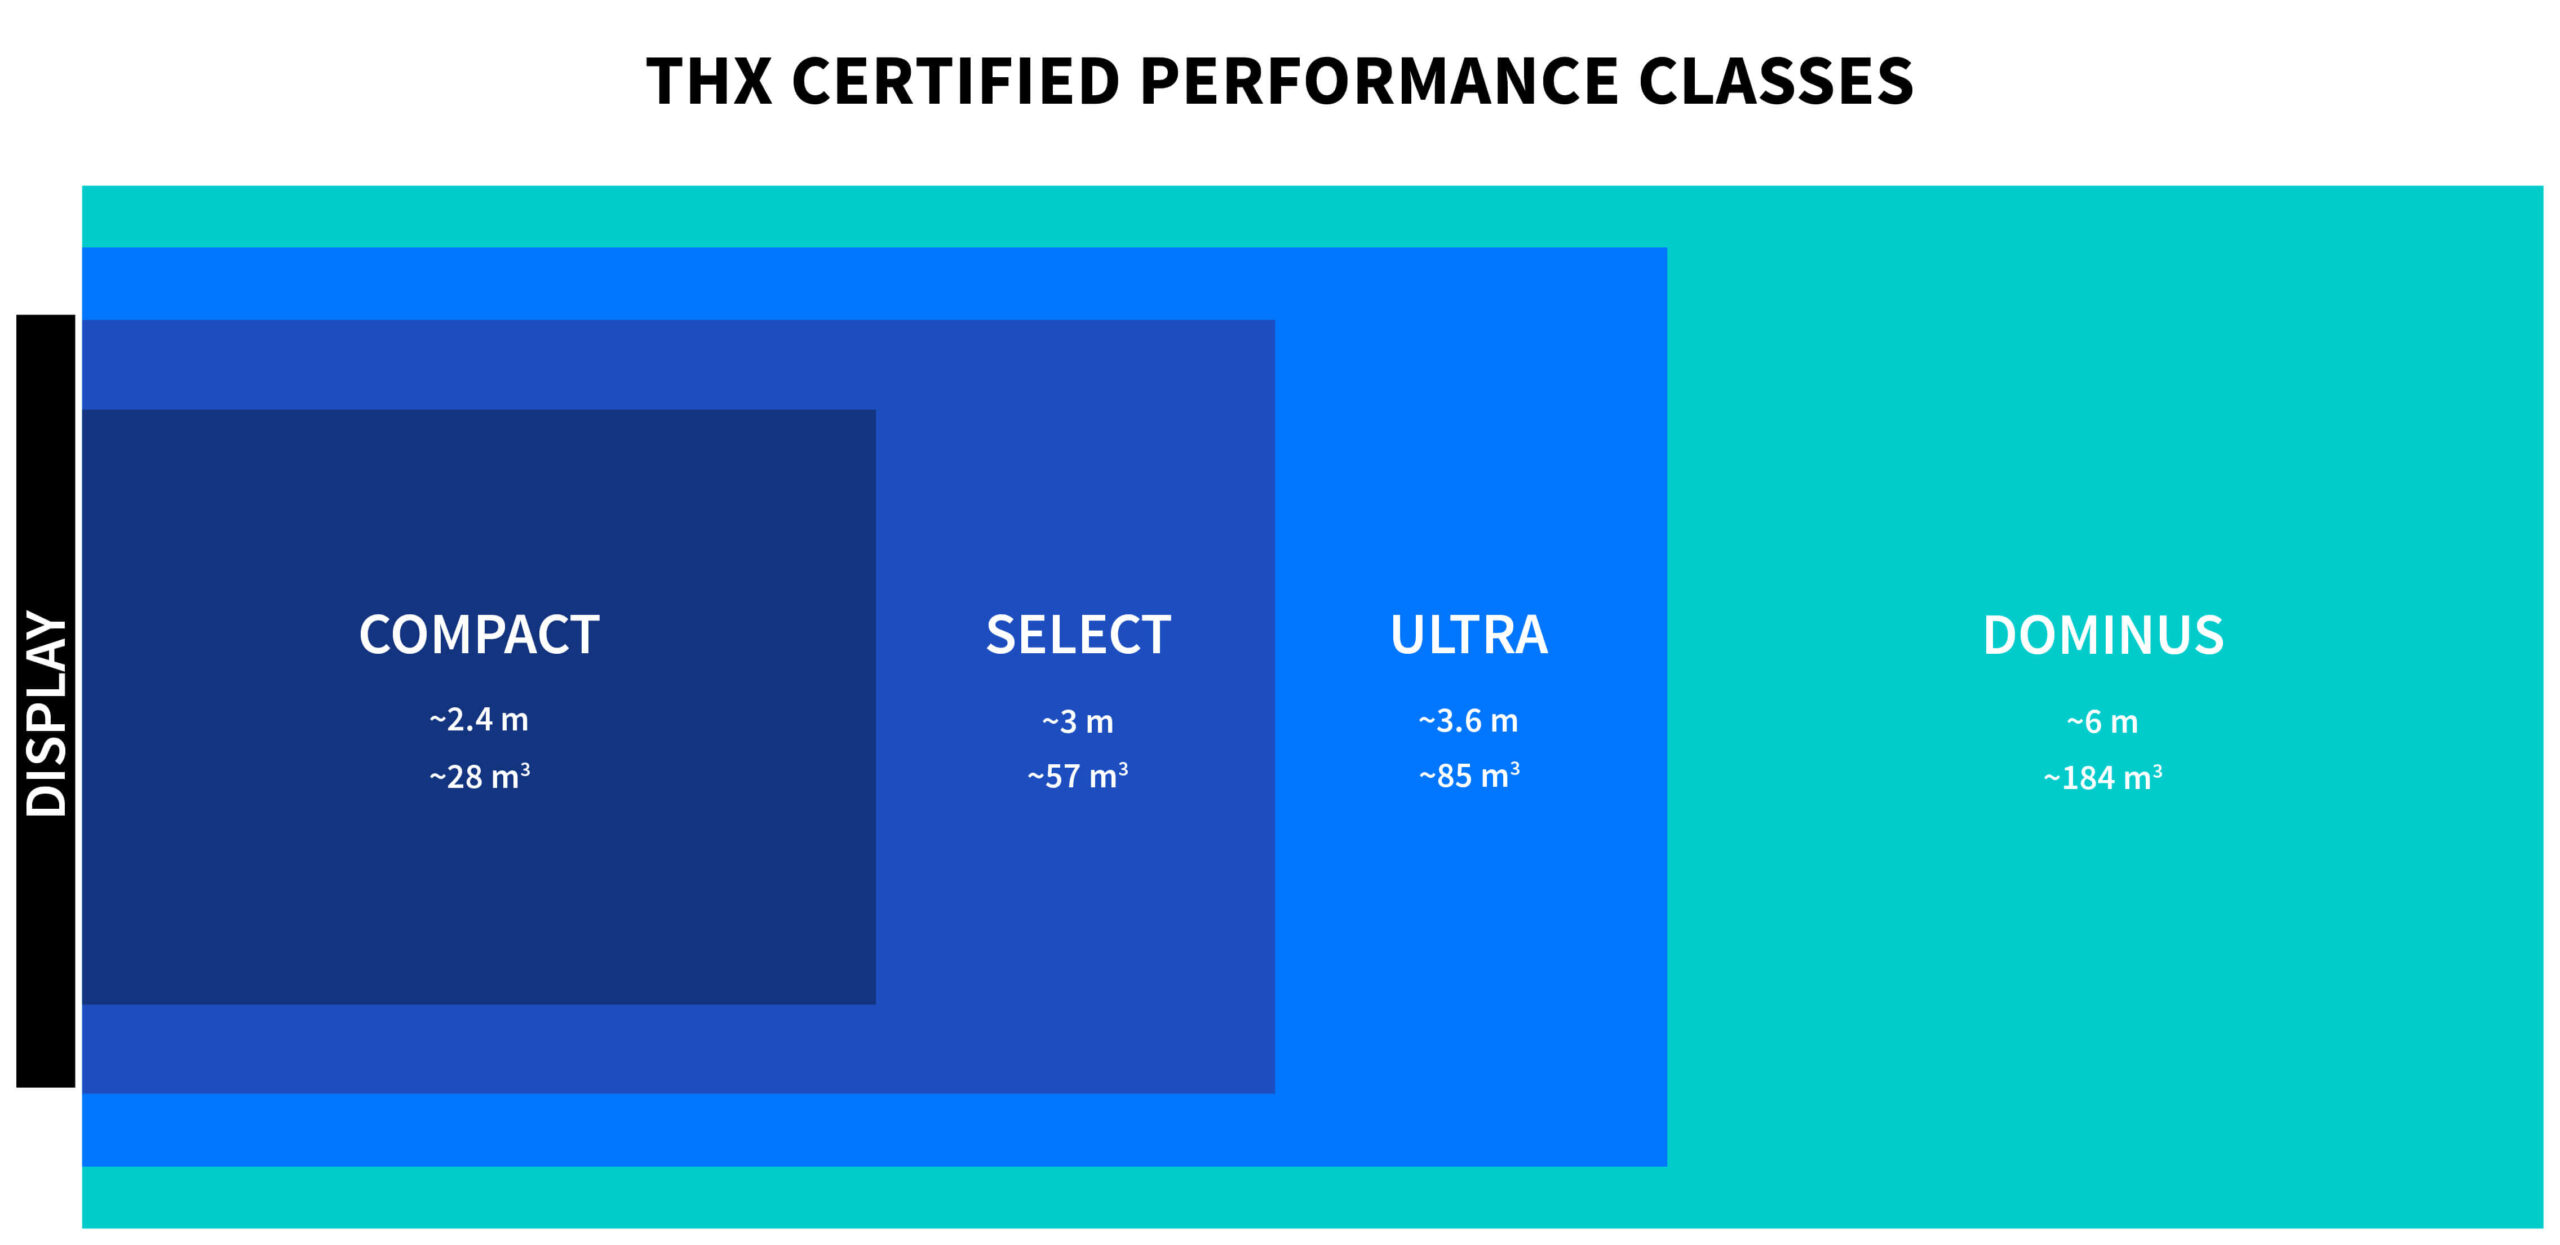 THX Certified Performance Classes graphic in meters